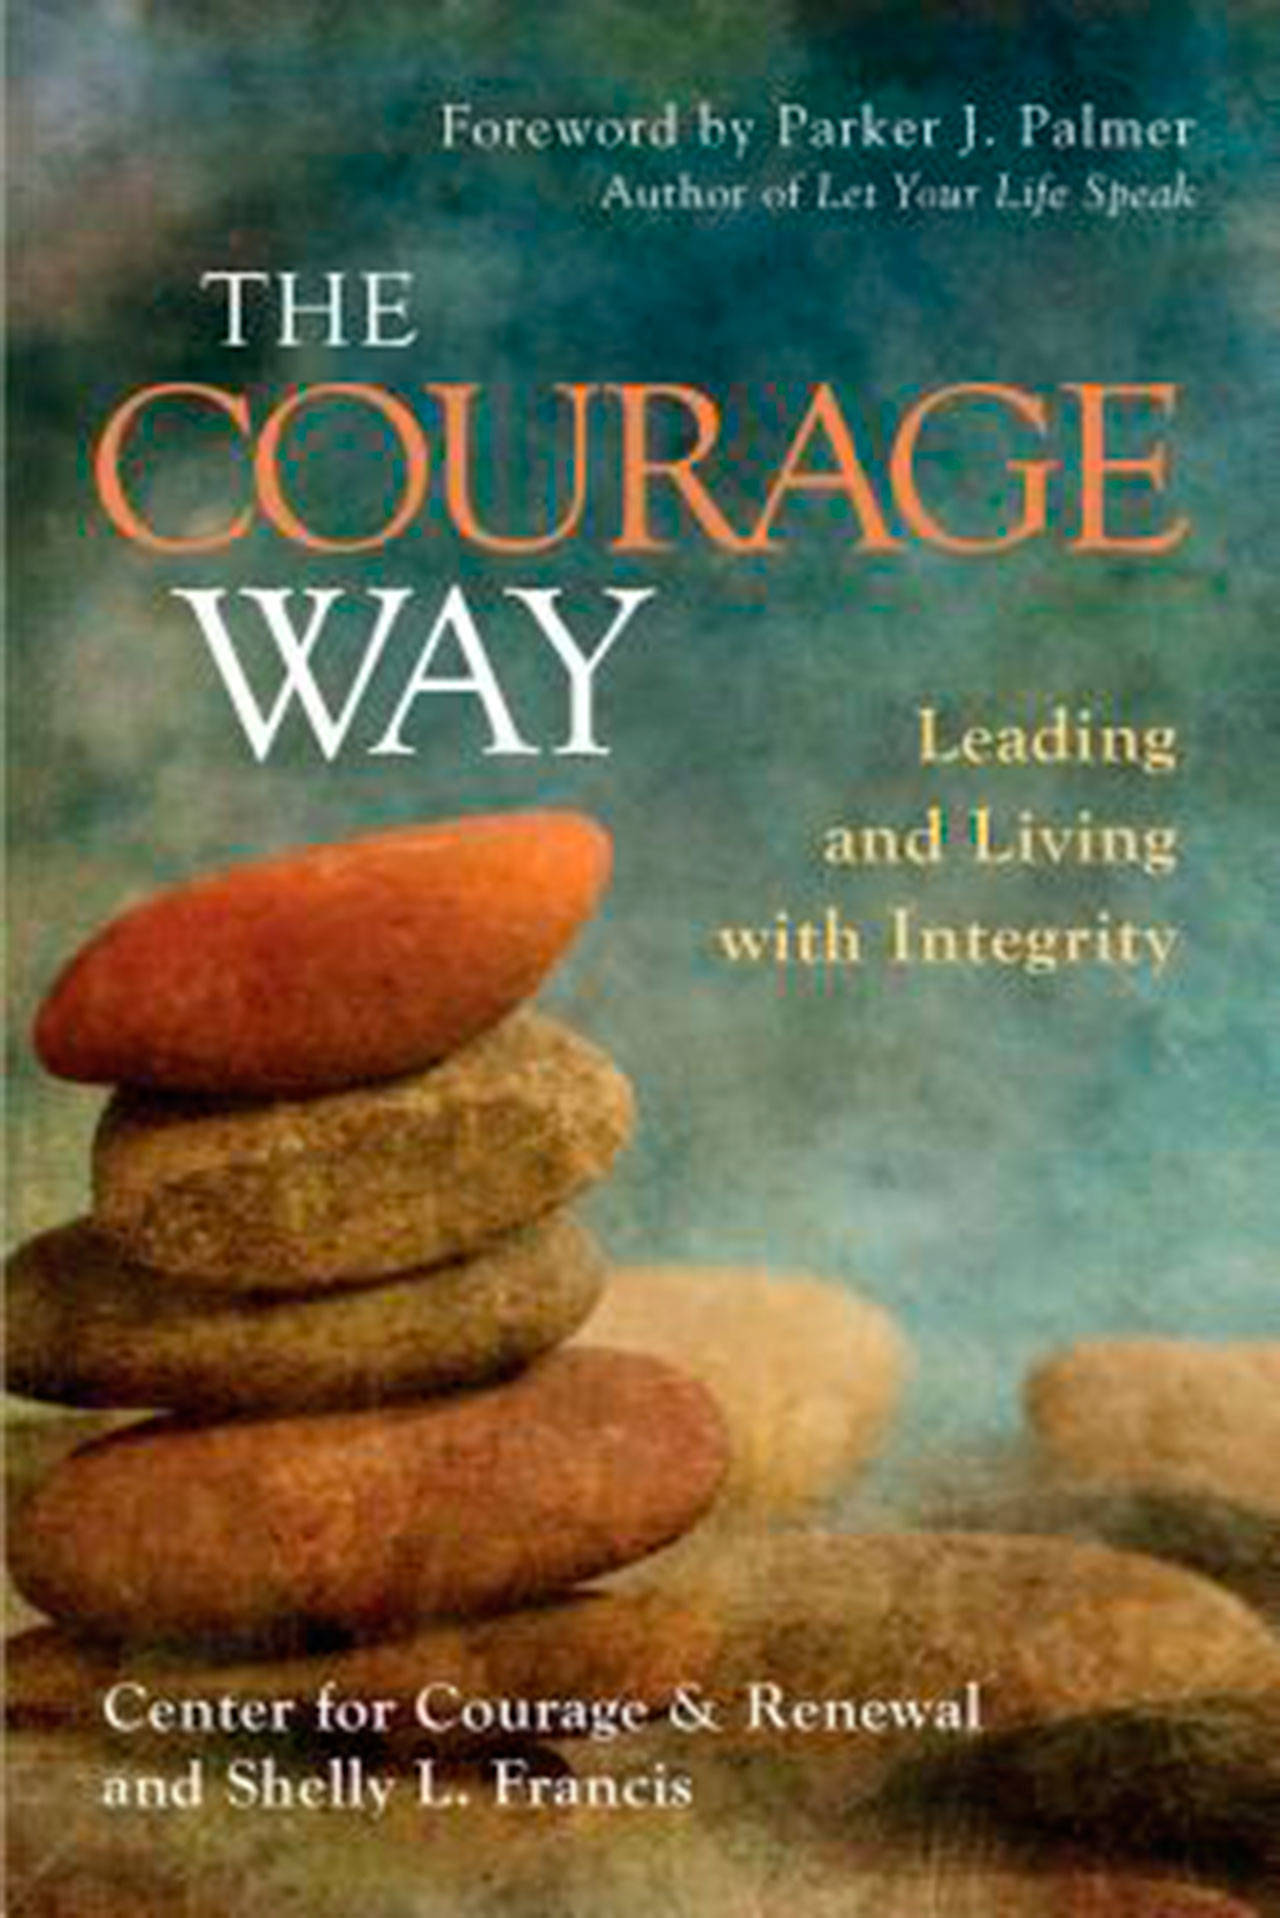 Image courtesy of Eagle Harbor Book Company | Eagle Harbor Book Company will host an evening of inspiration and forward thinking at 7 p.m. Thursday, March 22 when Shelly Francis, from the Center for Courage and Renewal, talks about the book “The Courage Way: Leading and Living with Integrity.”